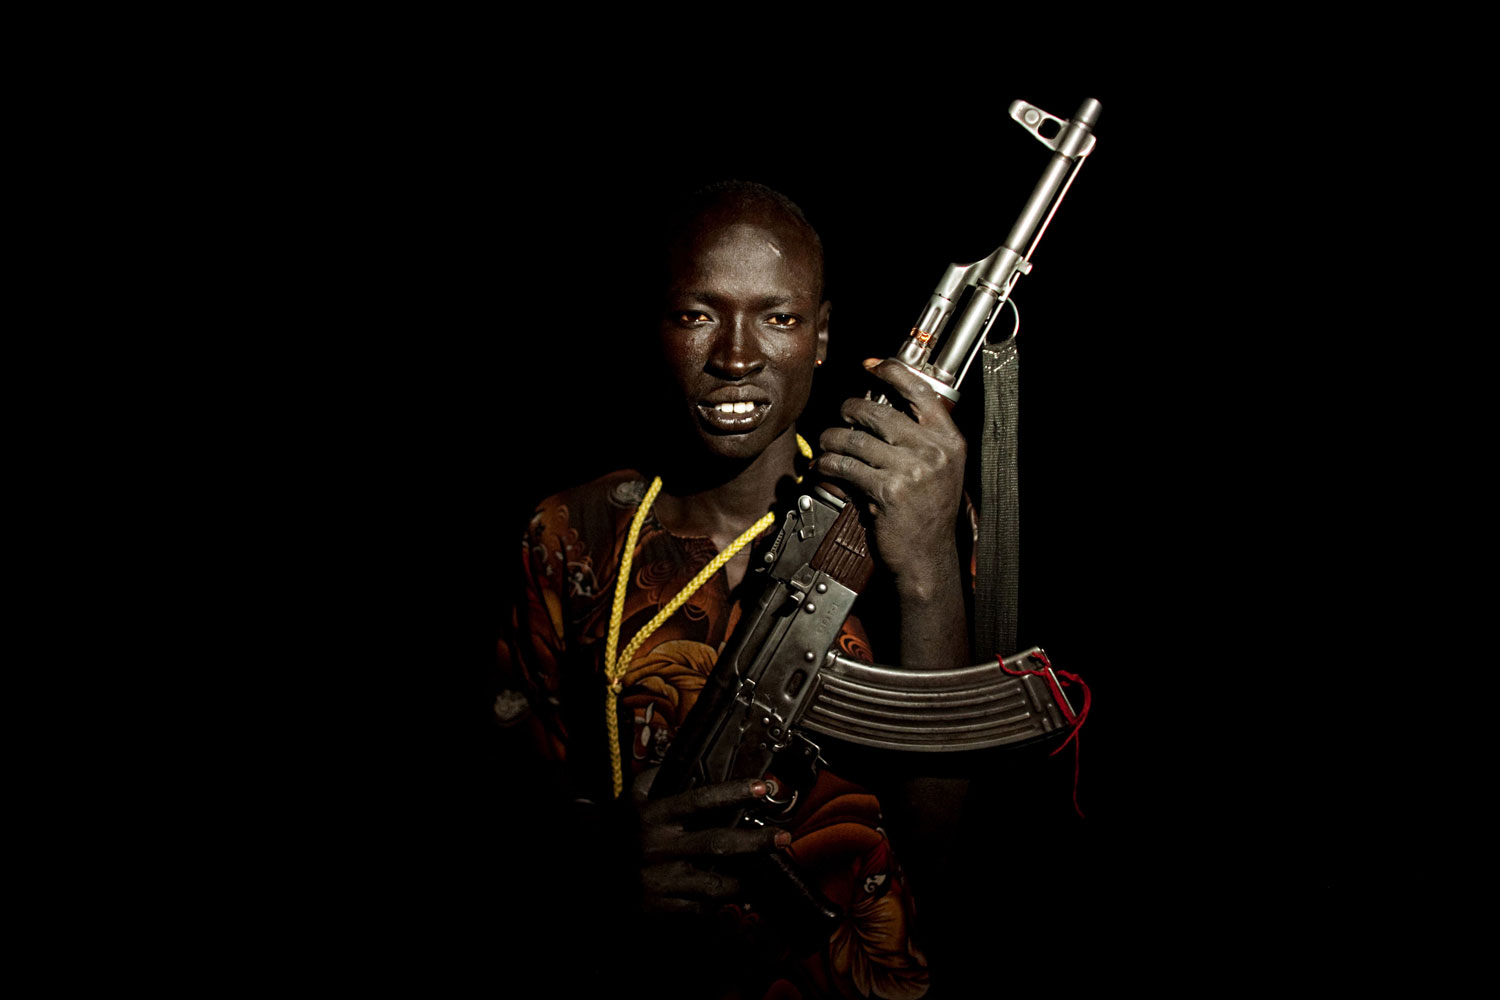 Portrait #5
                              April 21, 2011.  A young cattle keeper from the Dinka Rek sub-tribe poses for a portrait in a remote cattle camp in Wunlit County, southern Sudan. He holds an AK 47 assault rifle, a common weapon among young cattle keeping males.